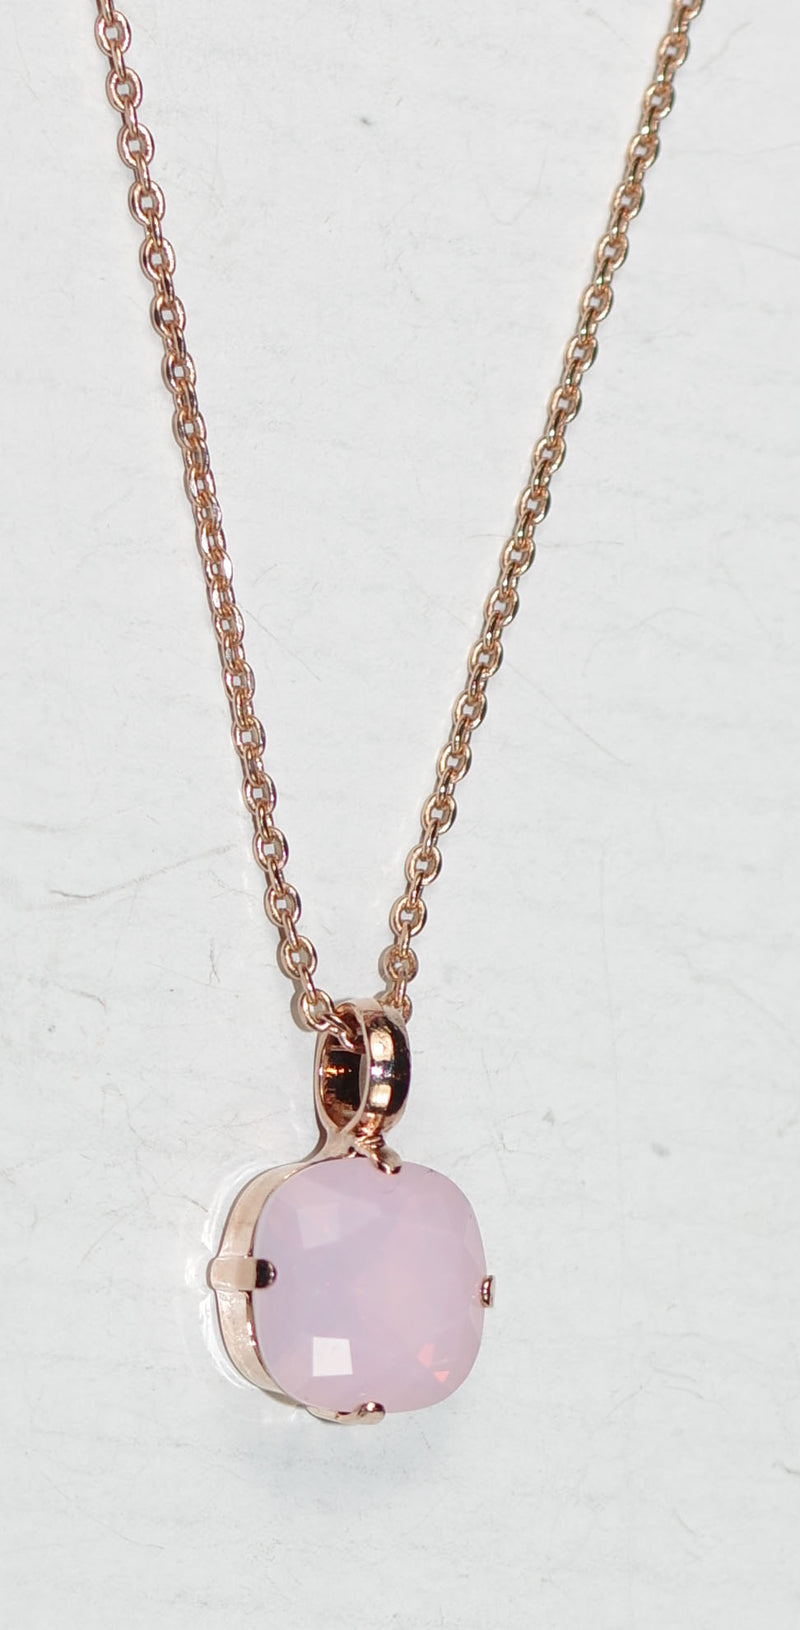 MARIANA PENDANT PINK: pink stone in rose gold setting, 18" adjustable chain